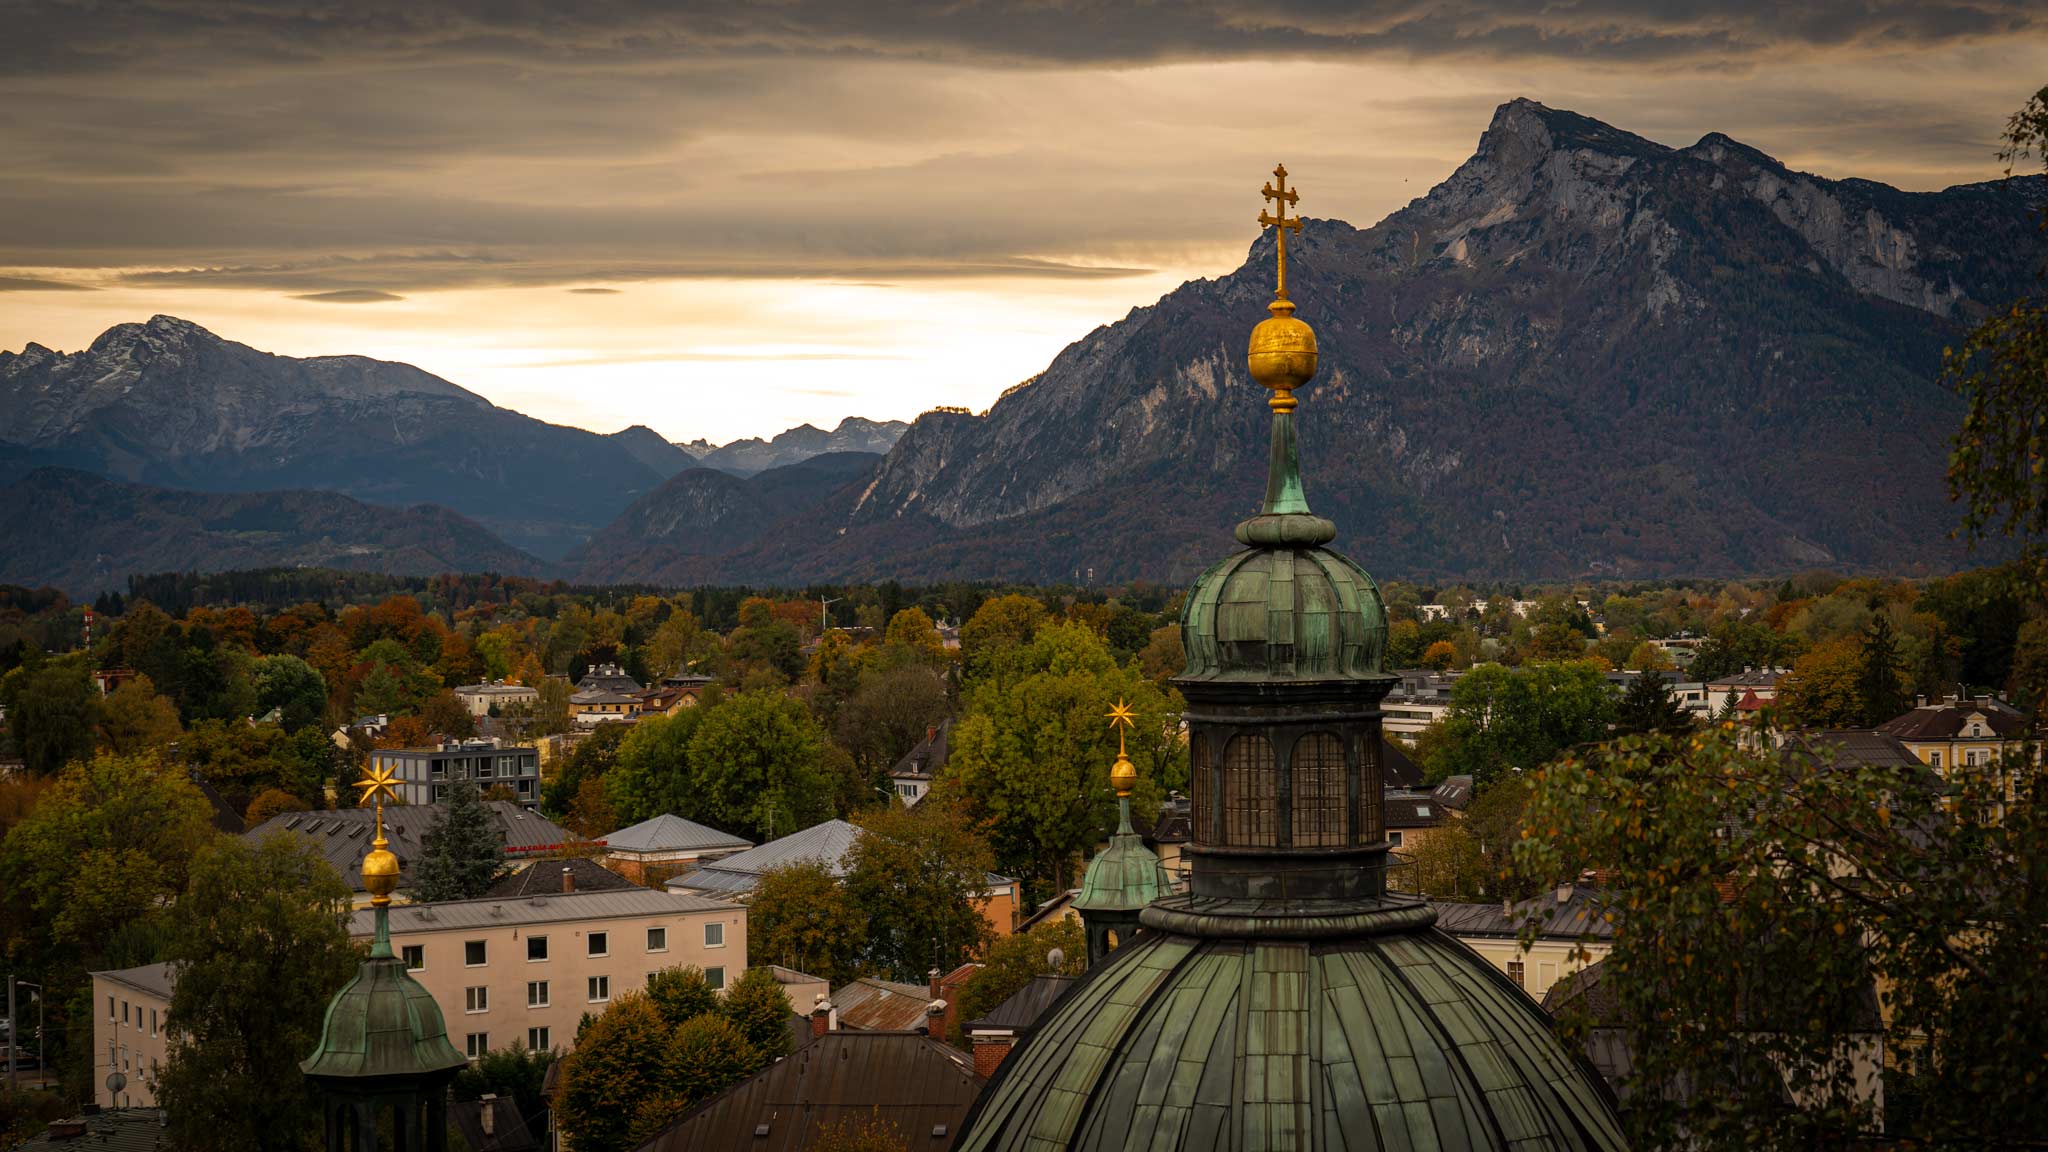 There's never a bad time to visit Salzburg